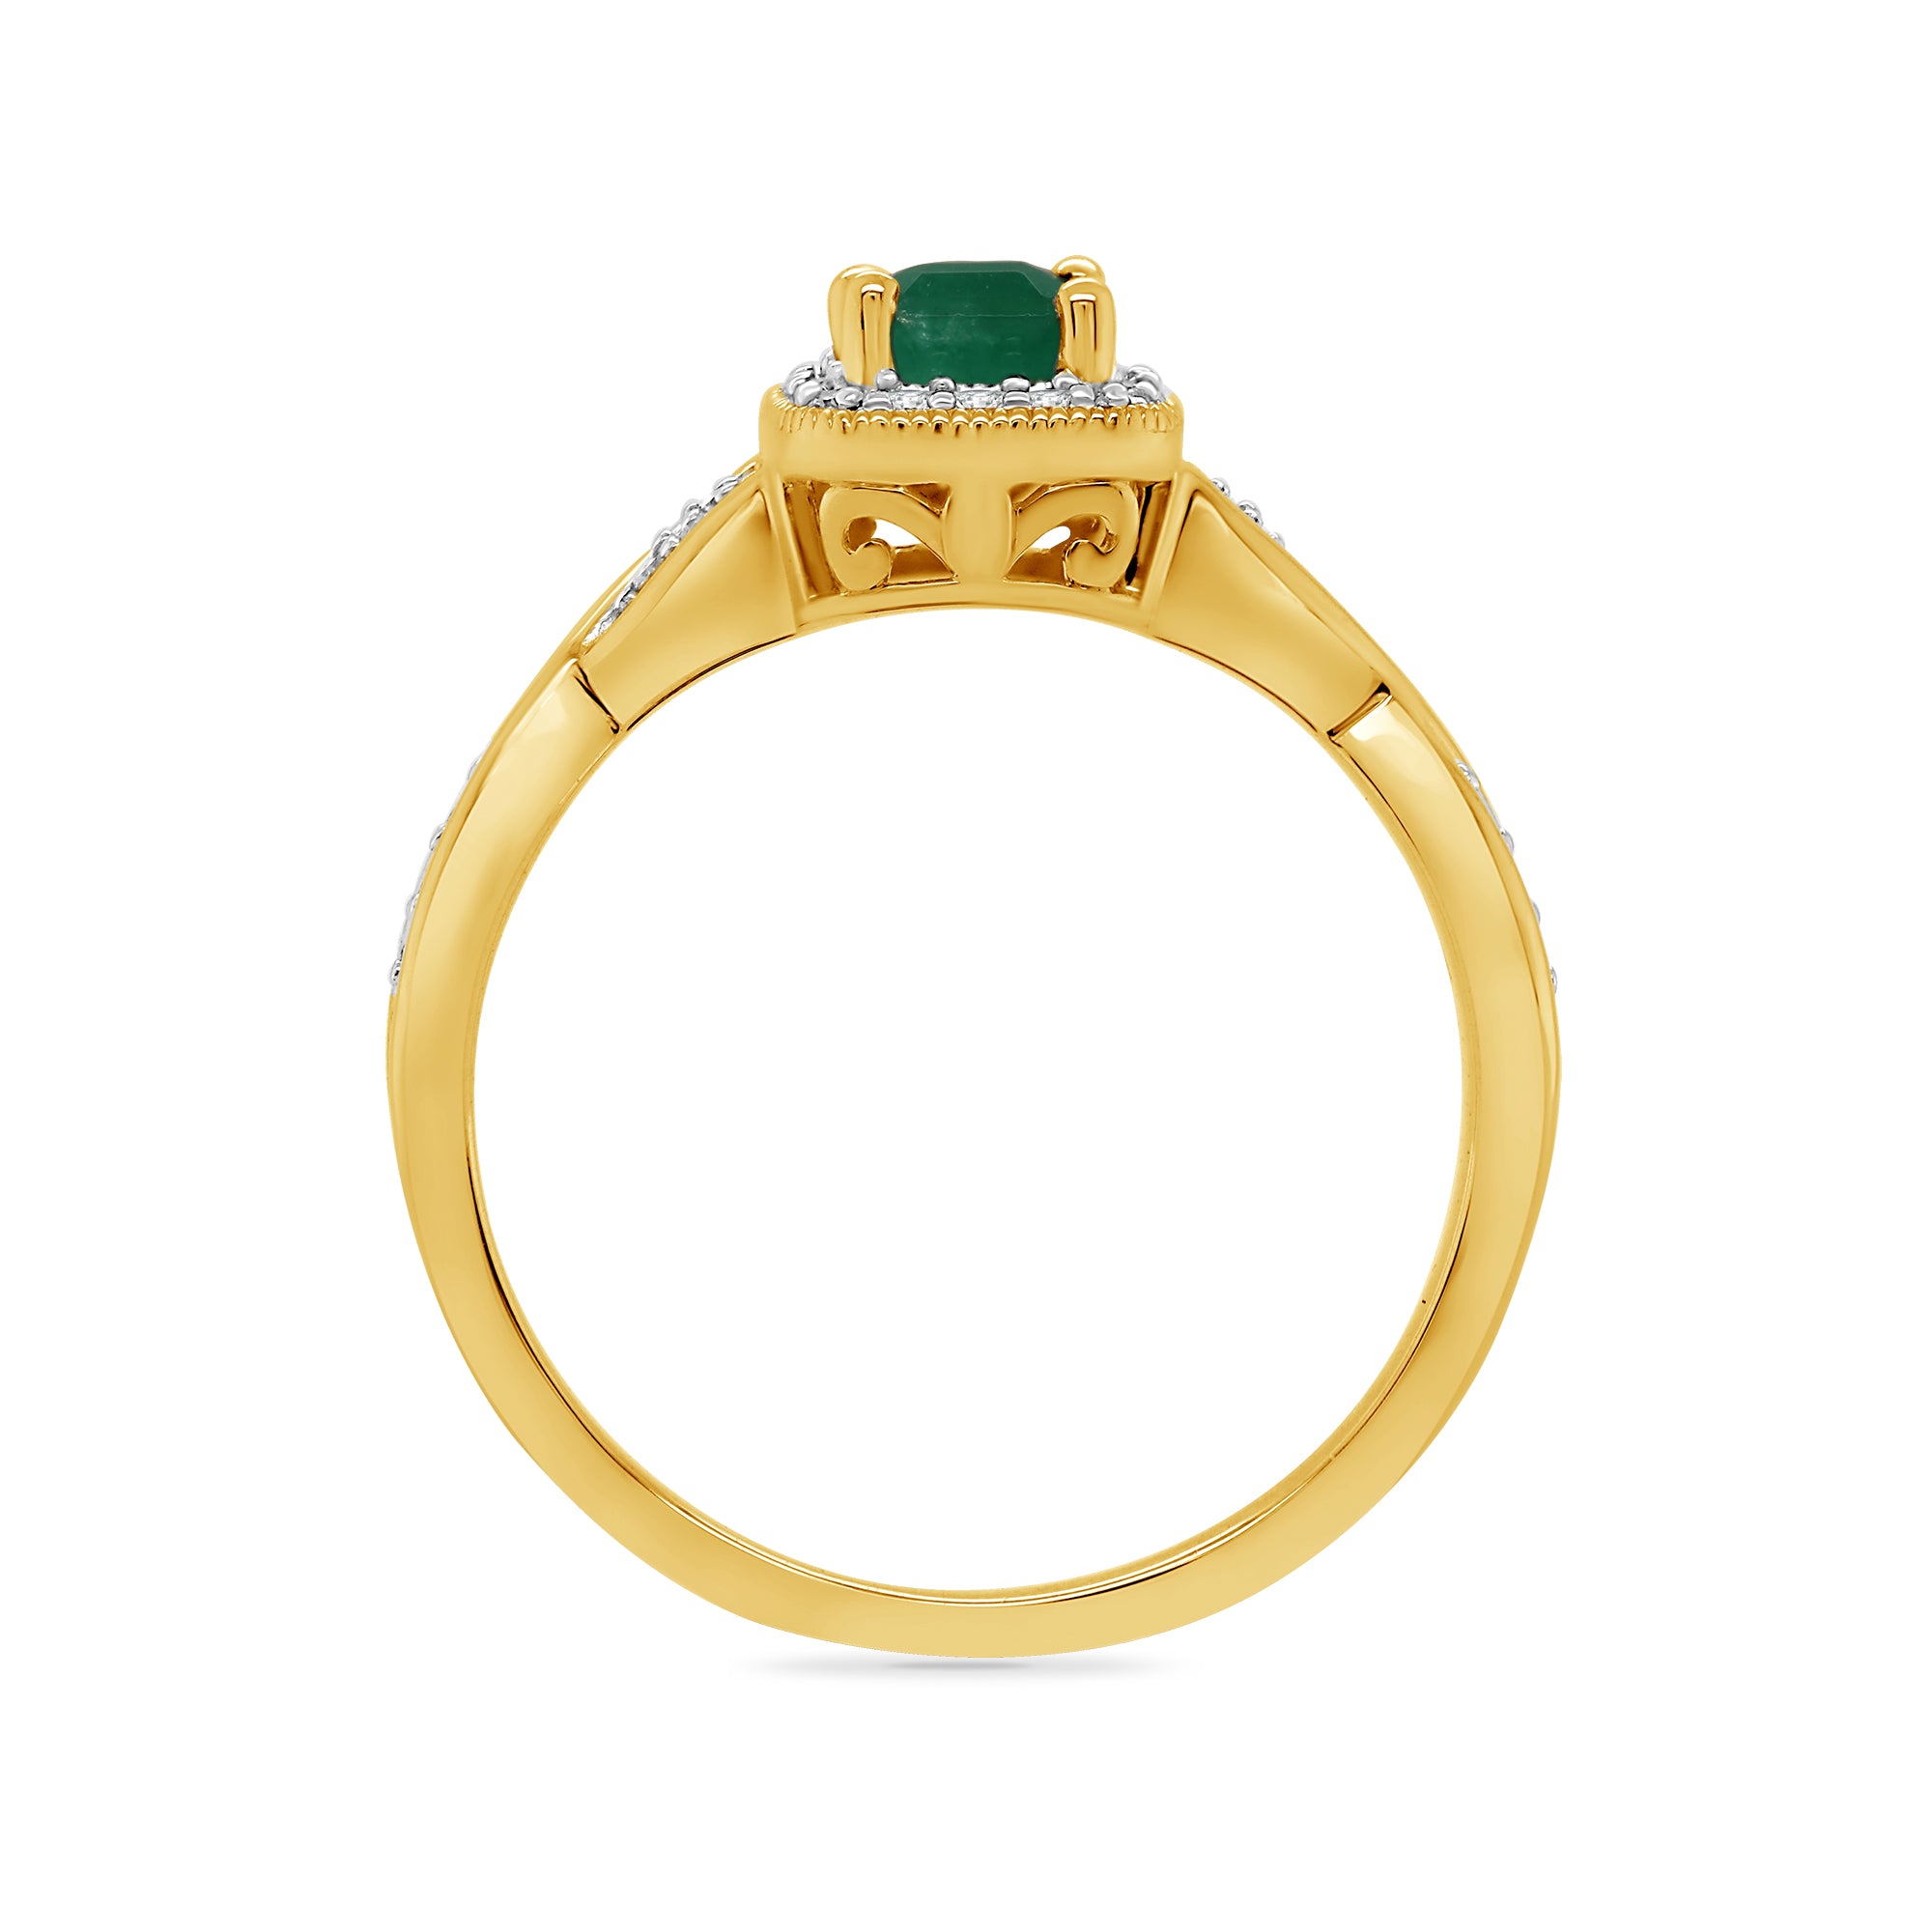 9ct gold 6x4mm octagon emerald & diamond cluster ring 0.14ct